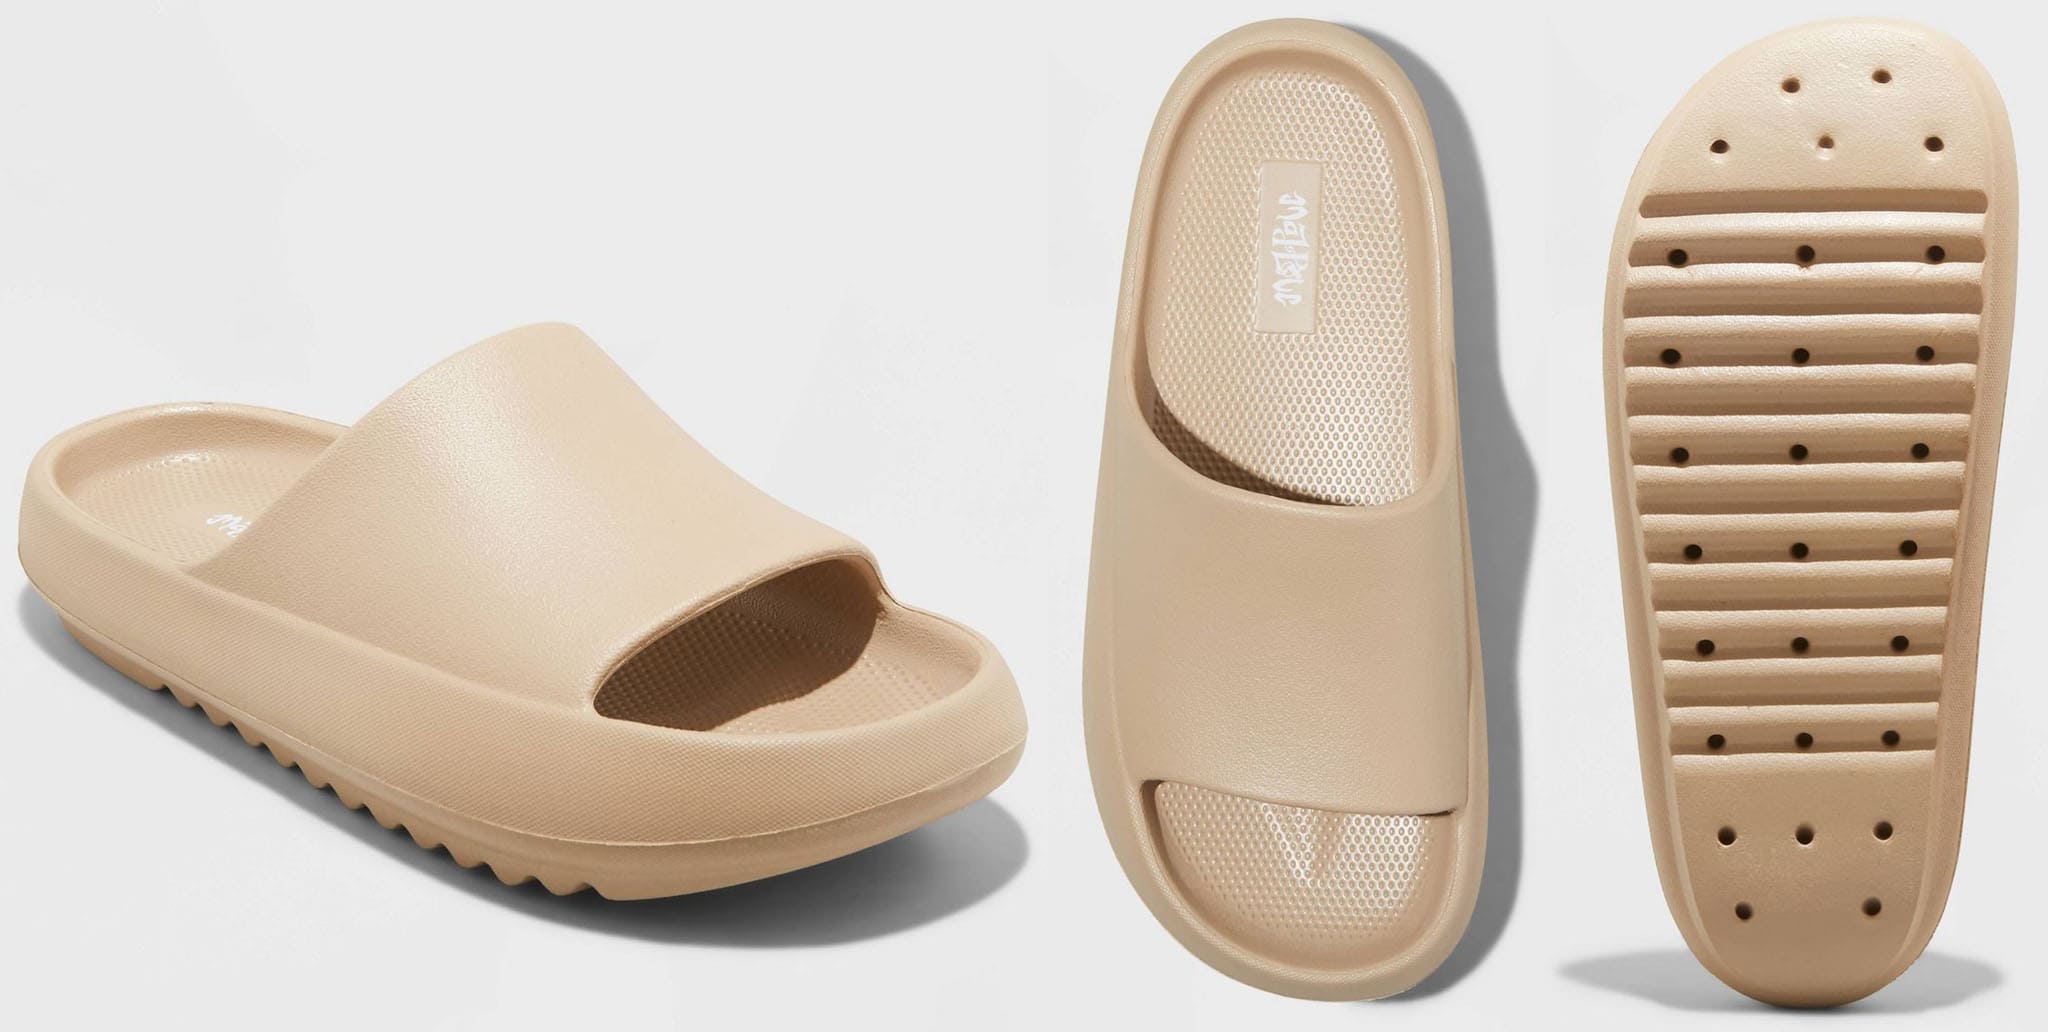 The Mad Love "Star" slide sandal is crafted from the same EVA foam material as Yeezy's version